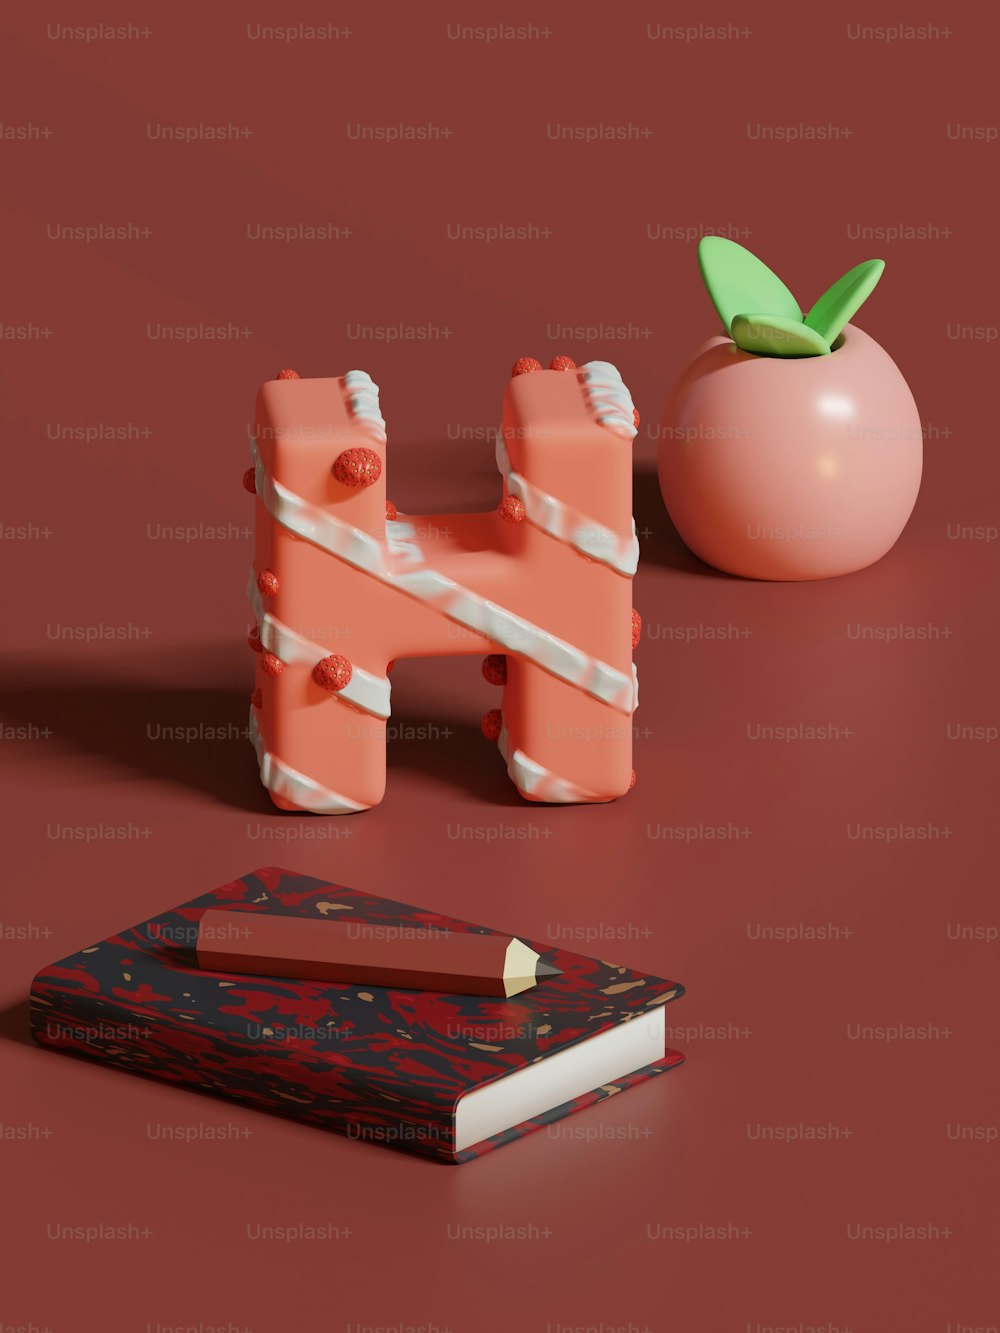 a pink object sitting on top of a table next to a book